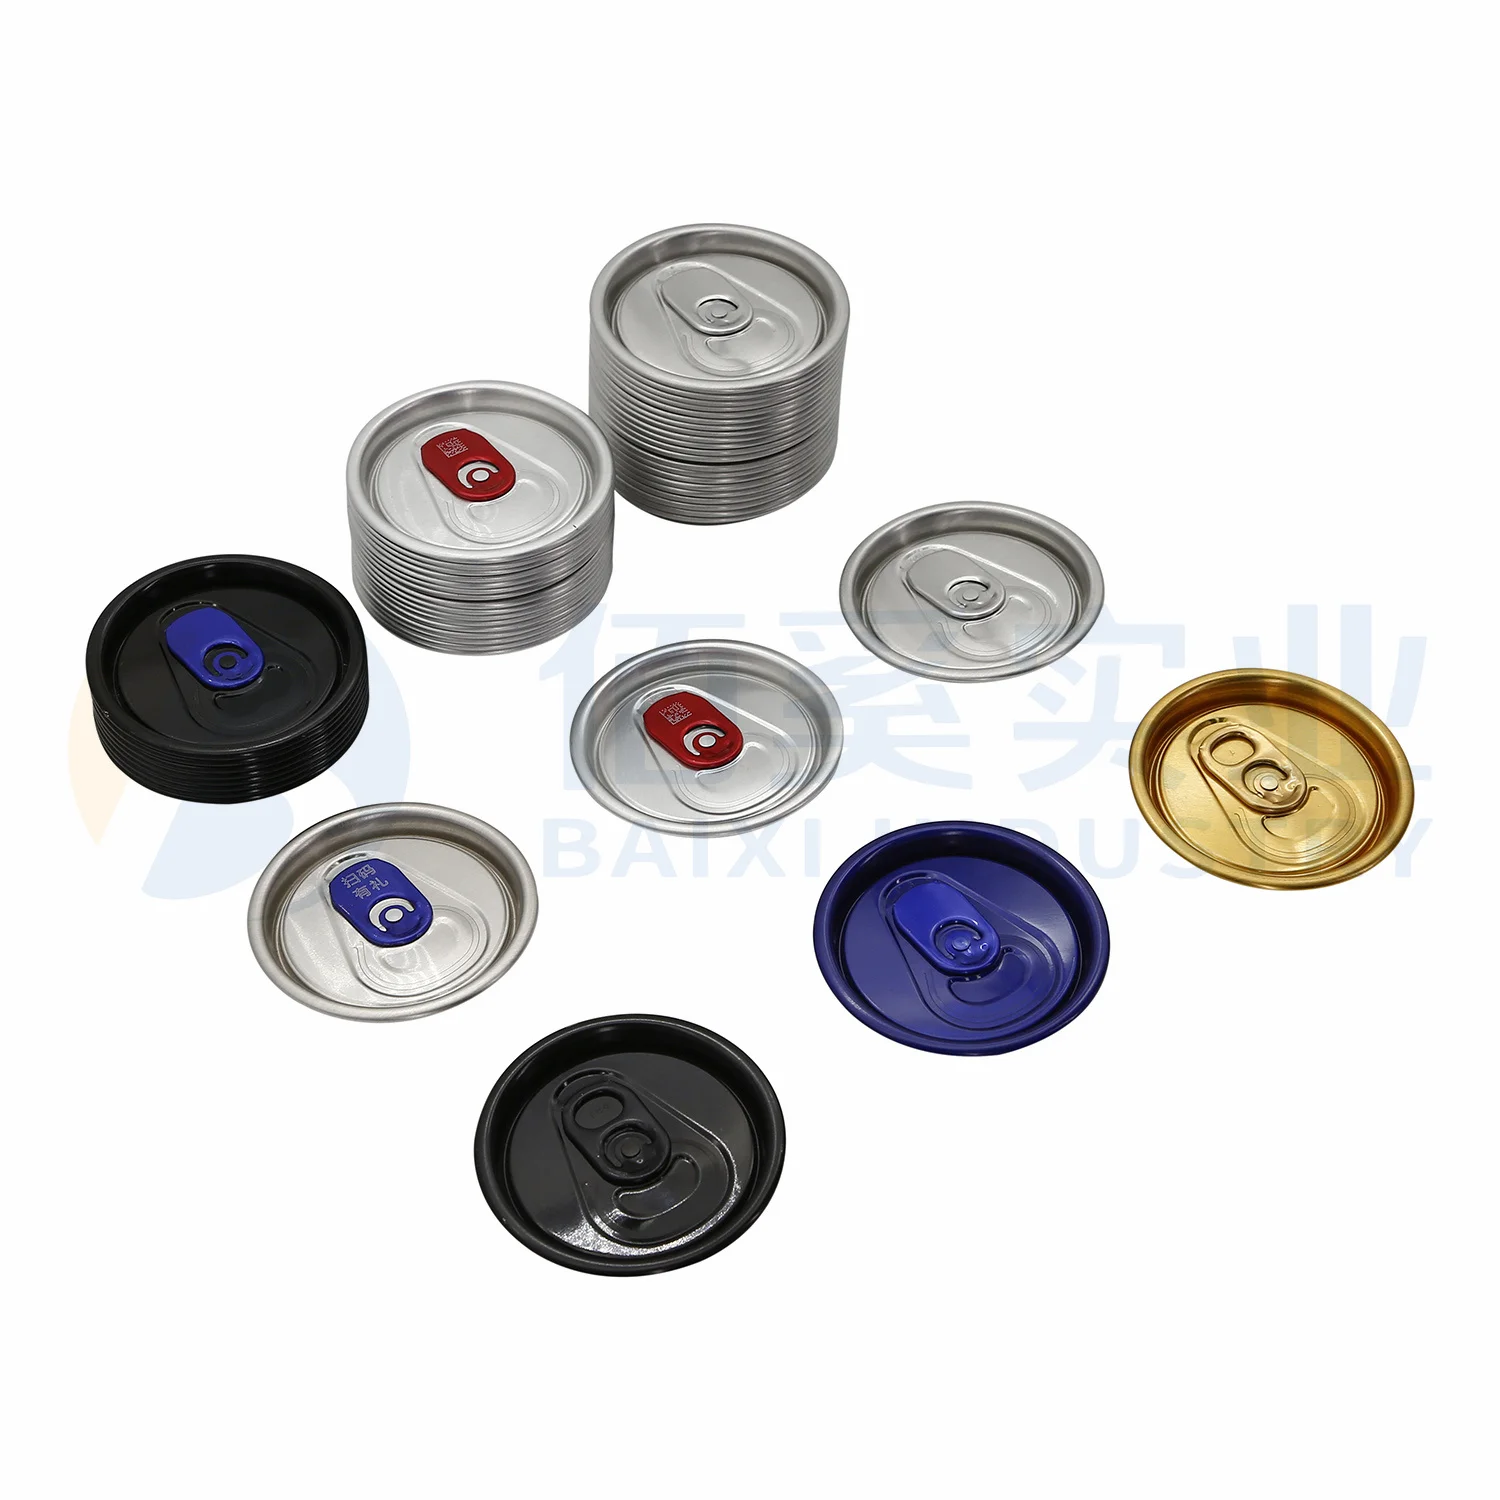 

202 B64 SOT easy open ends Aluminum can lids for beverage cans